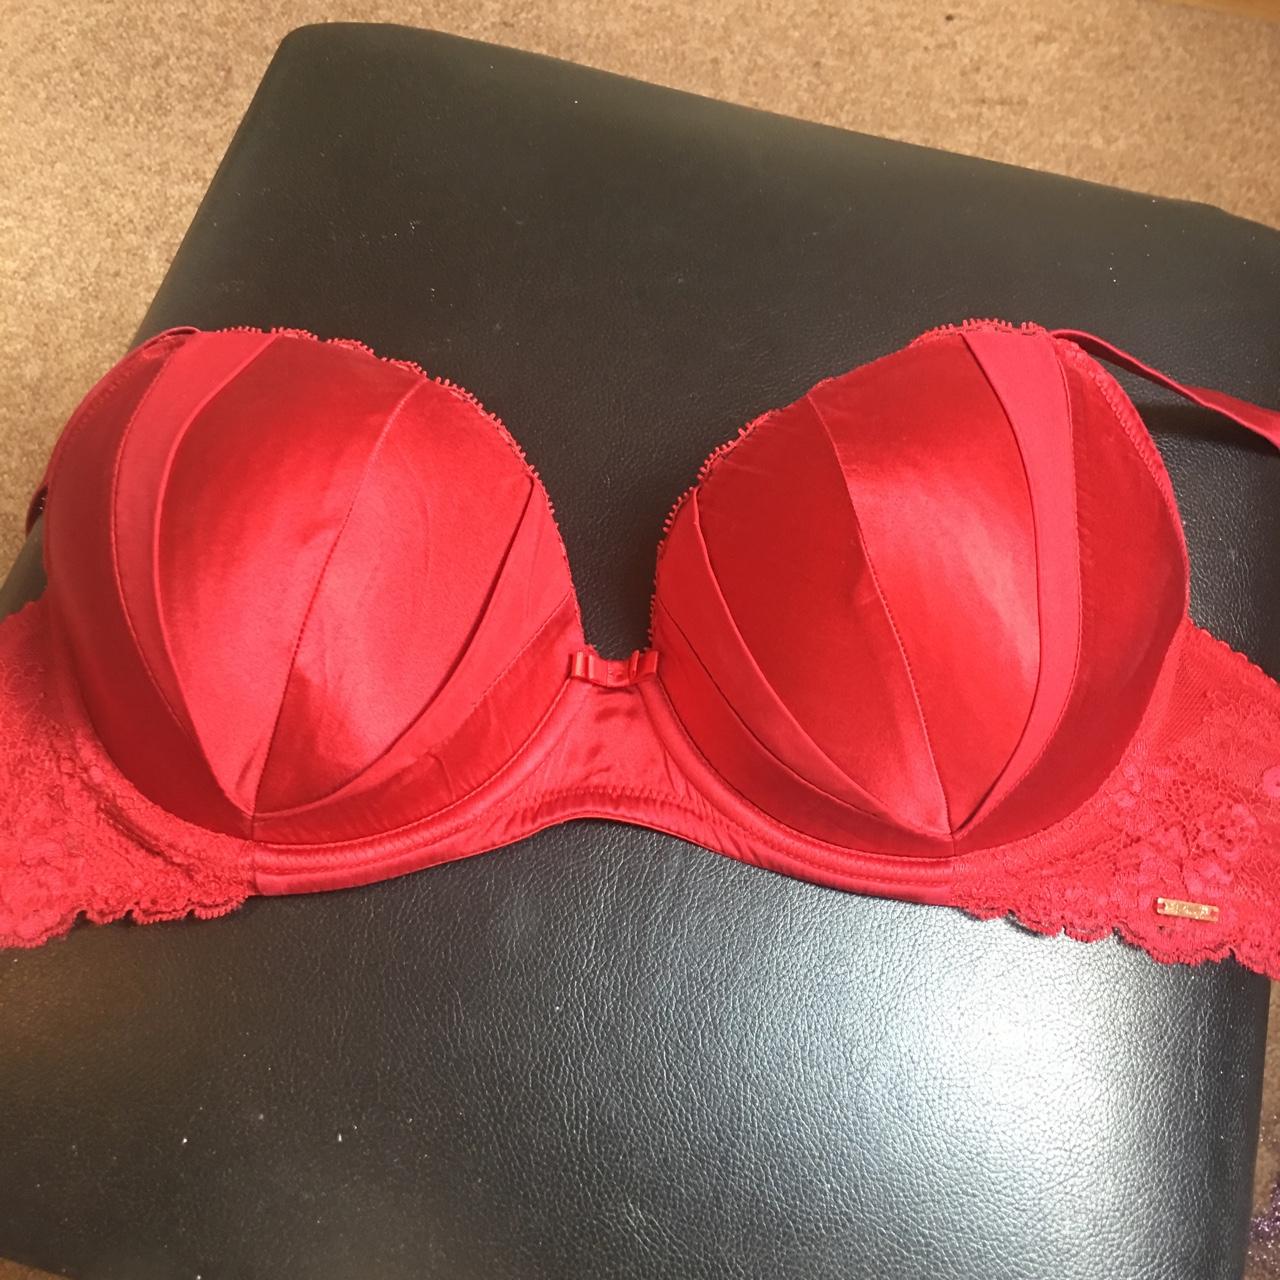 RED SATIN BRA, - Size 34D, - New Without Tags